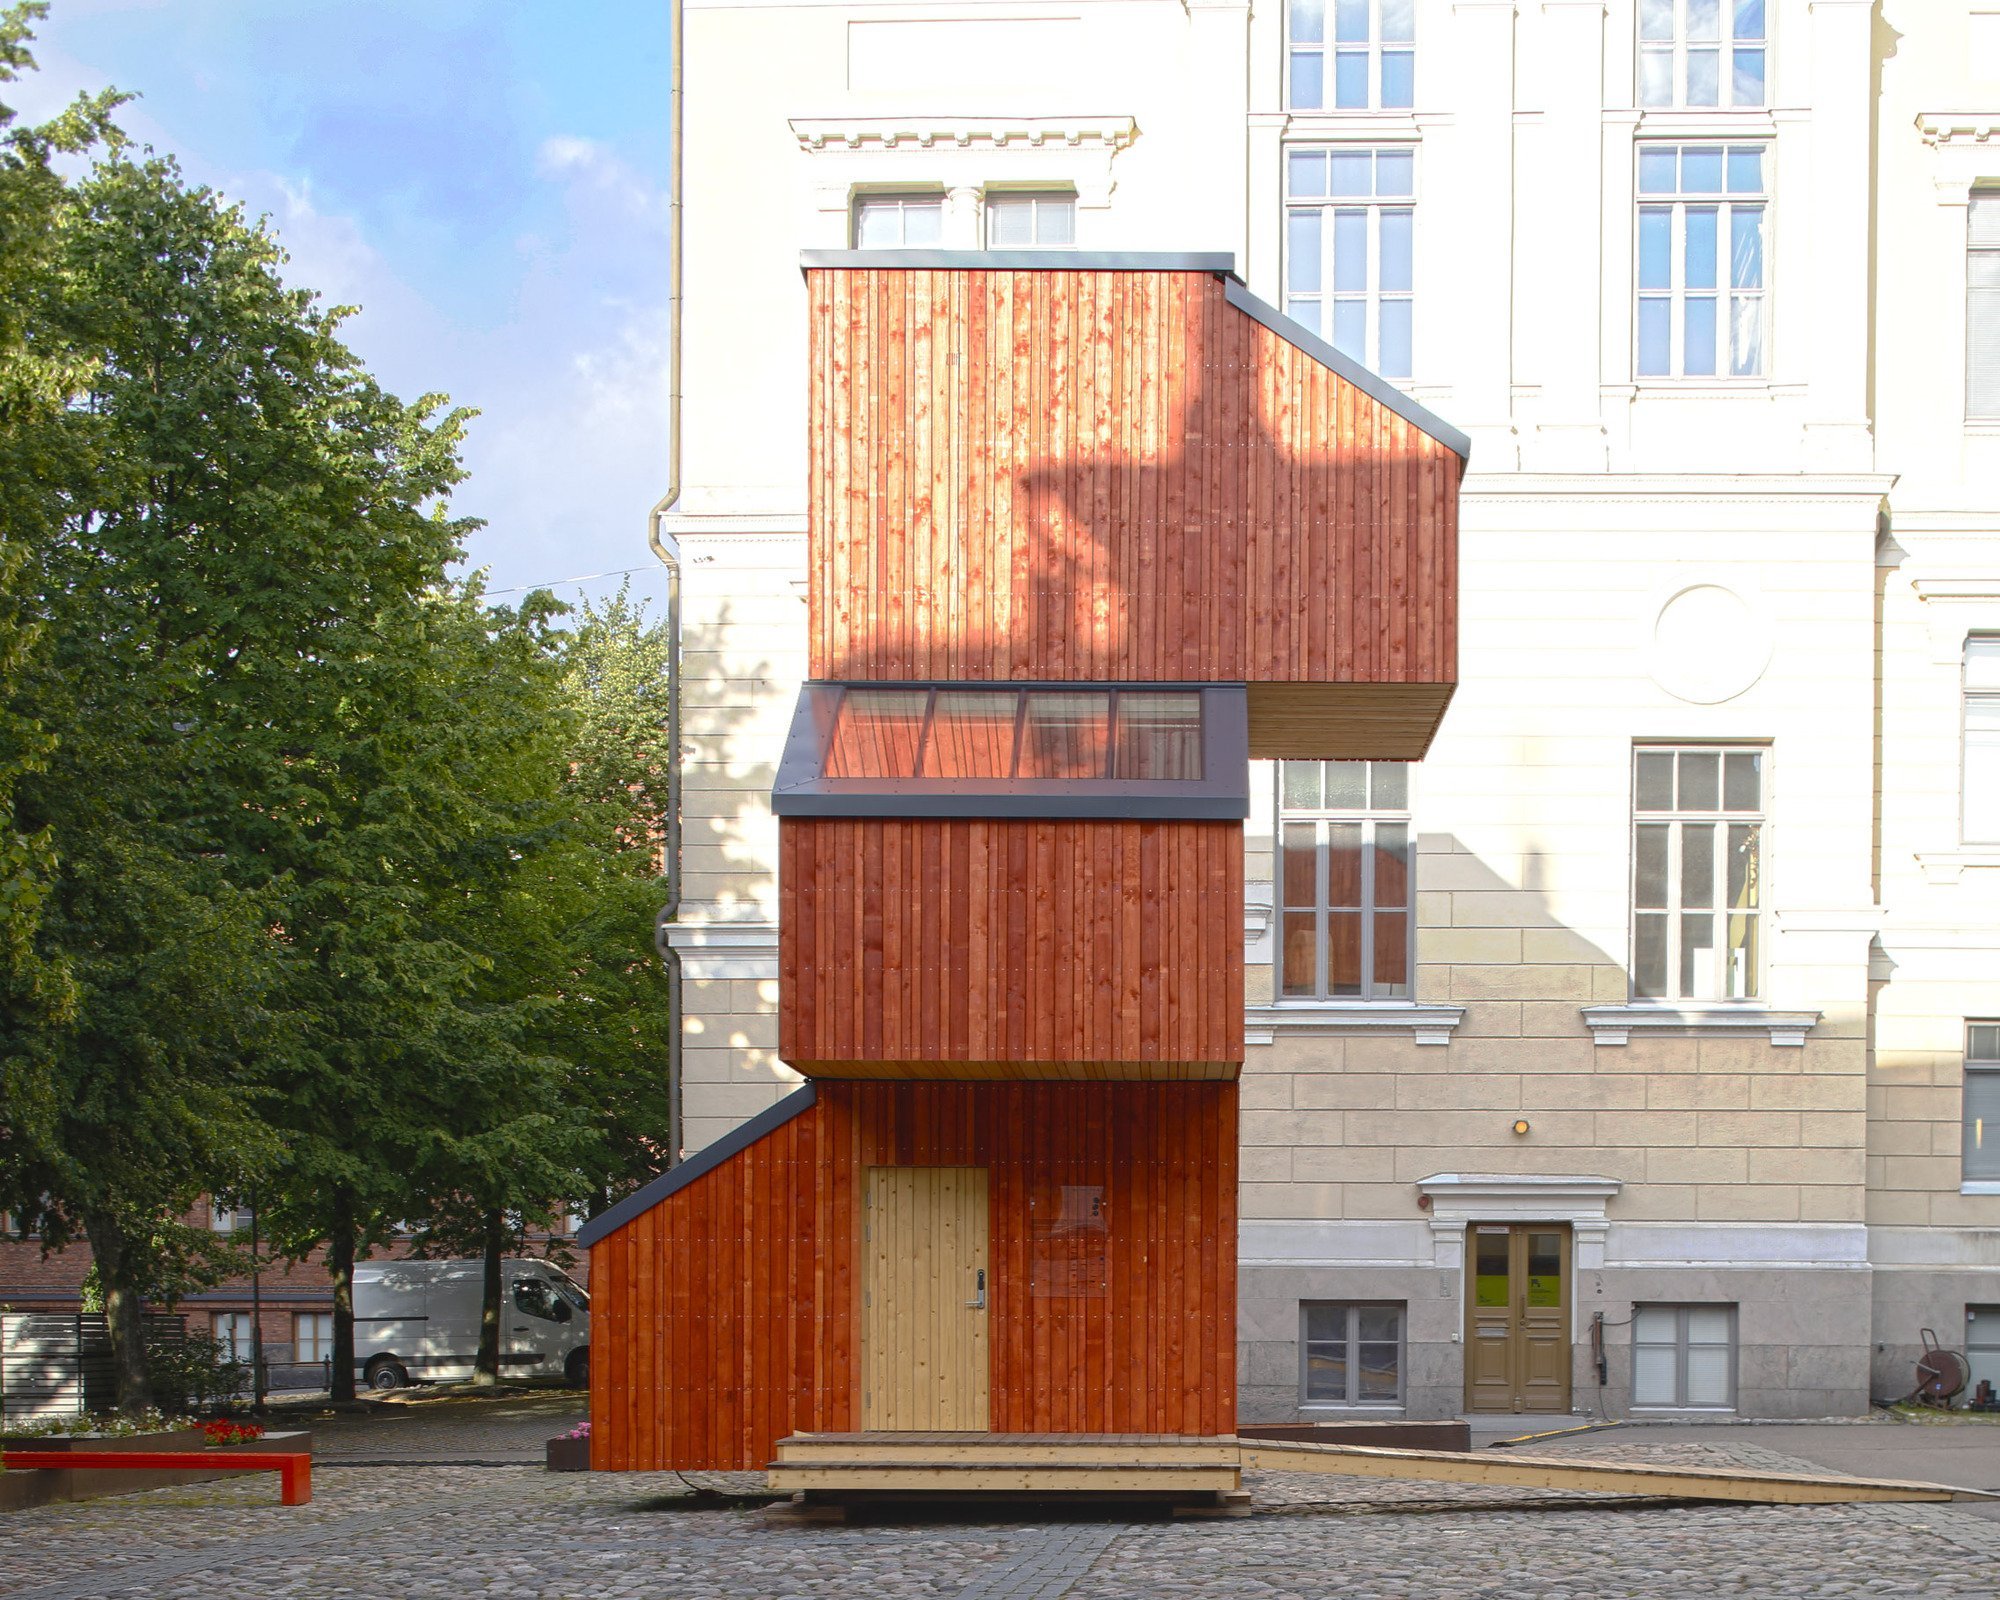 In Finland, the students created a house that is constructed in 1 day and costs only €13 000